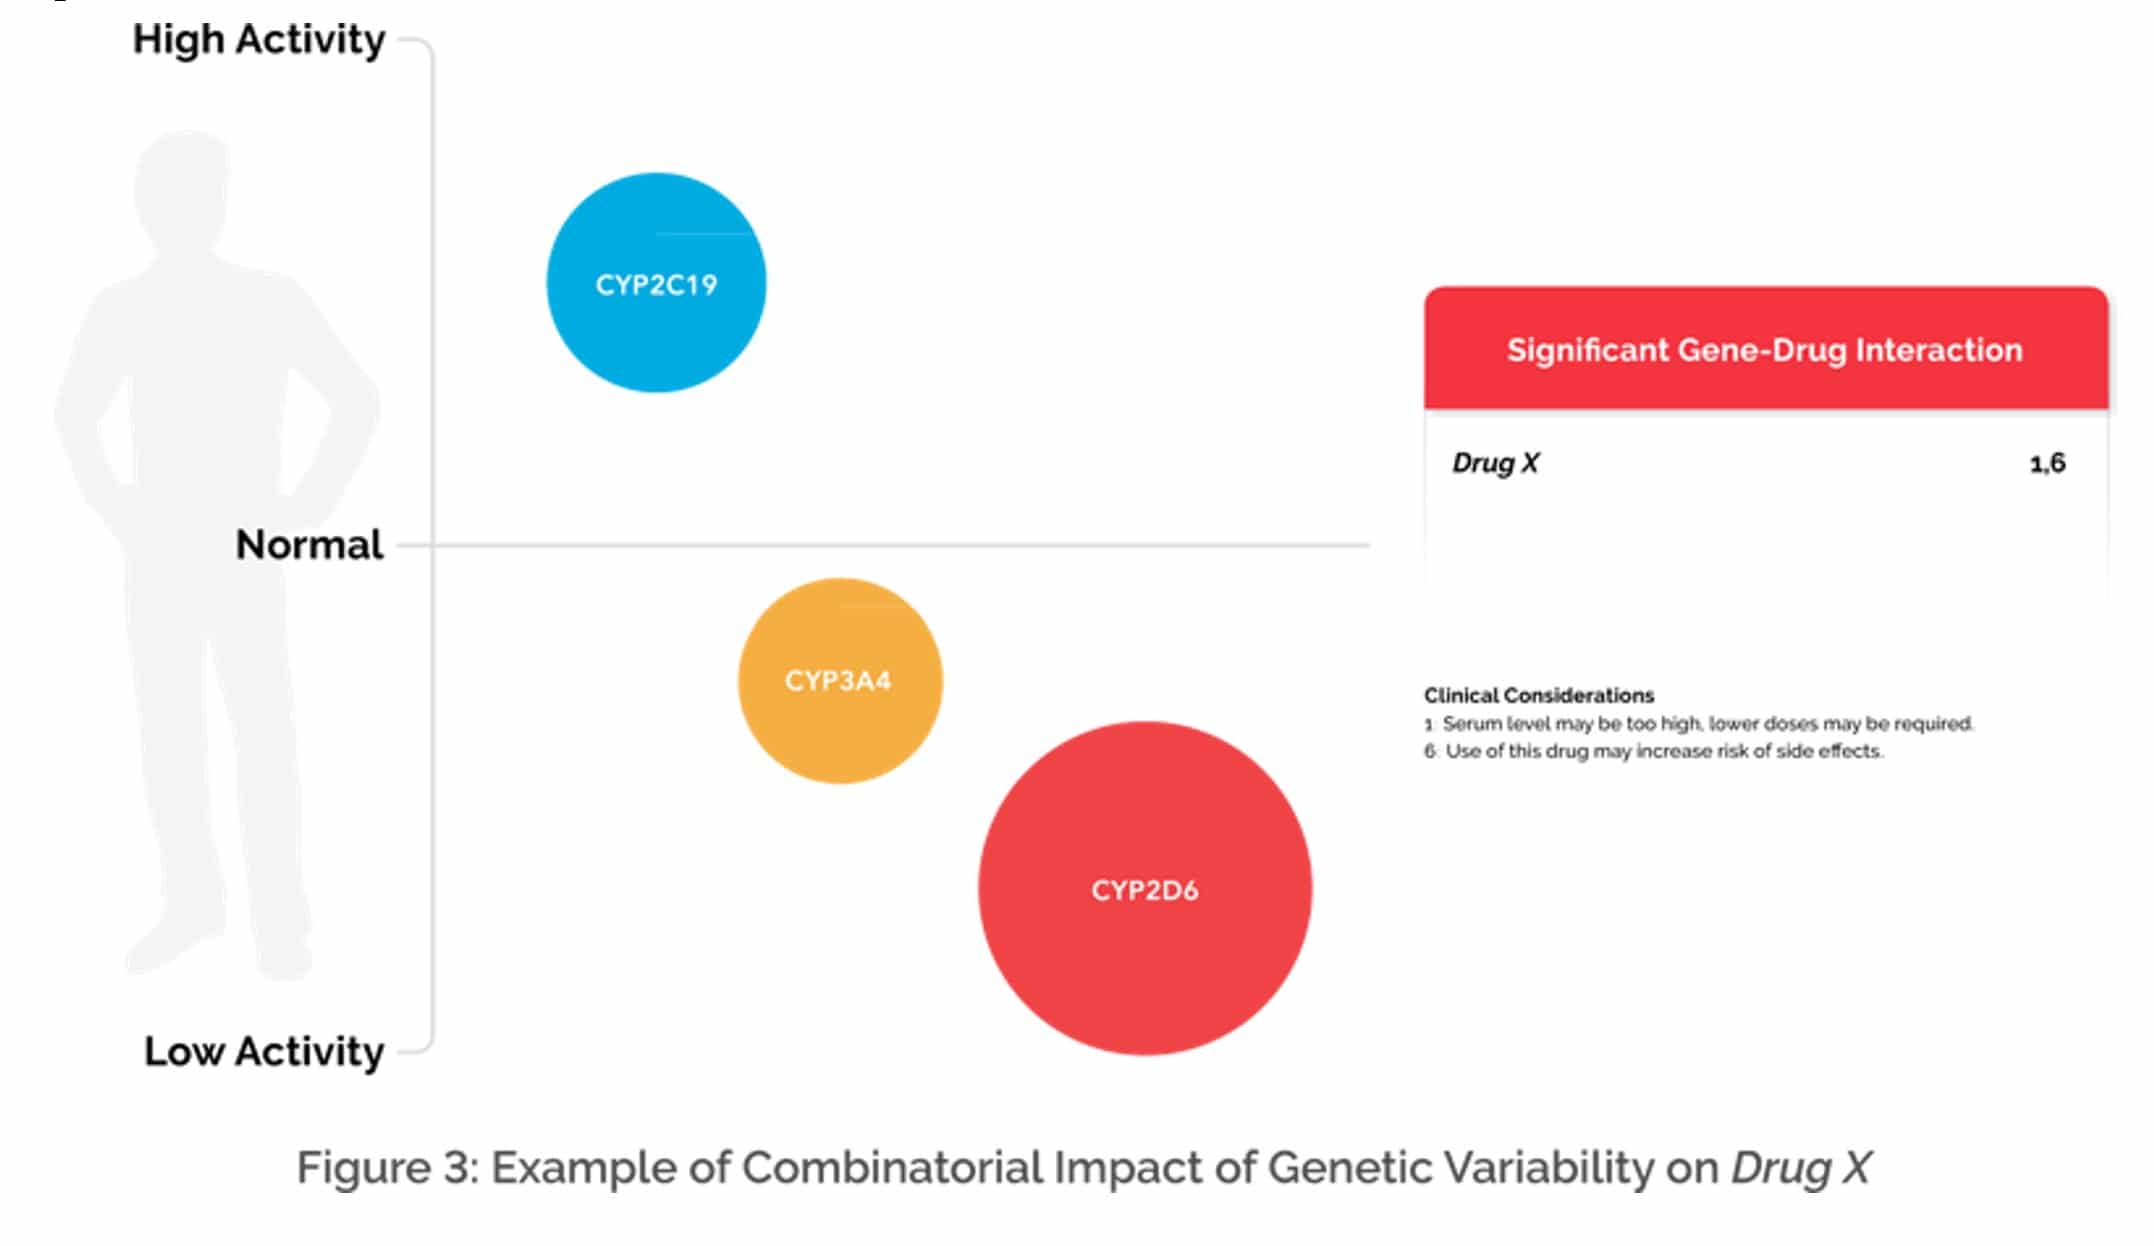 Image showing Example of Combinatorial Impact of Genetic Variability on Drug X